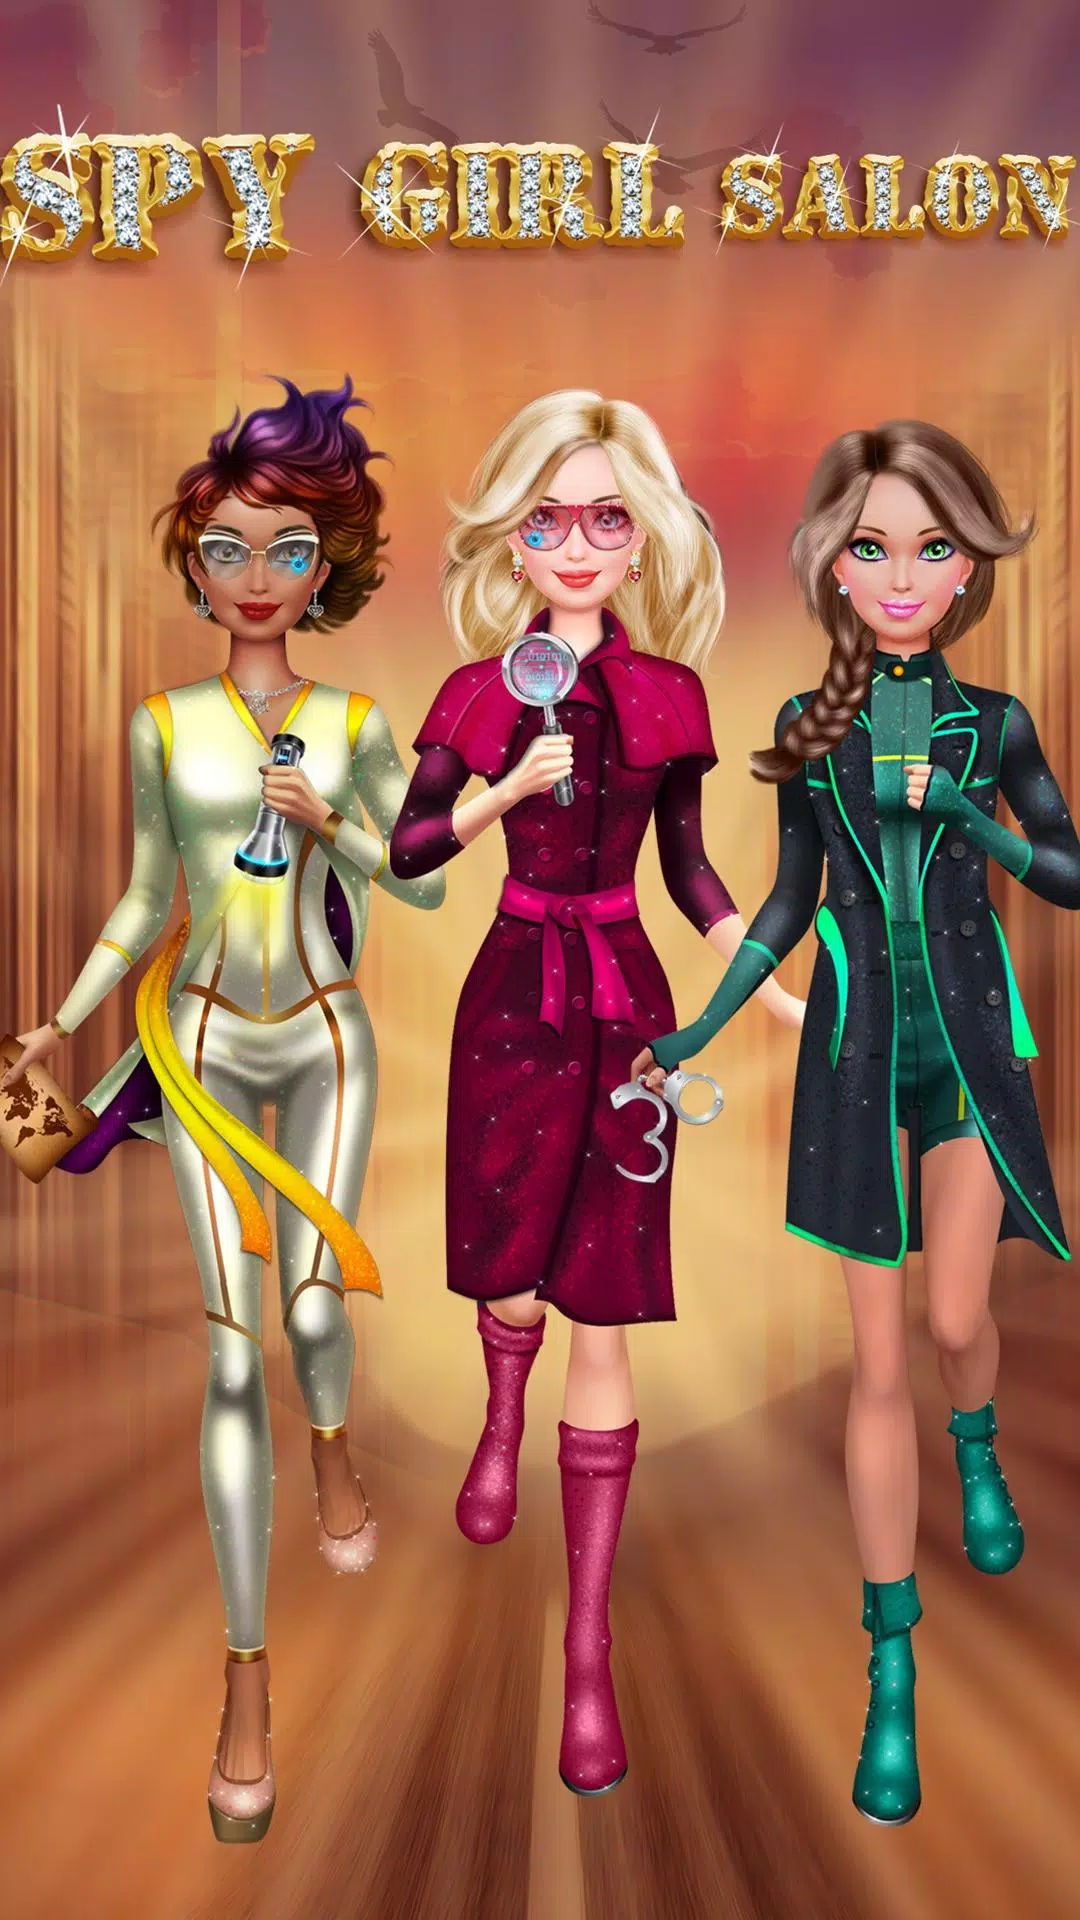 Spy Dress Up Game for Girls APK for Android Download